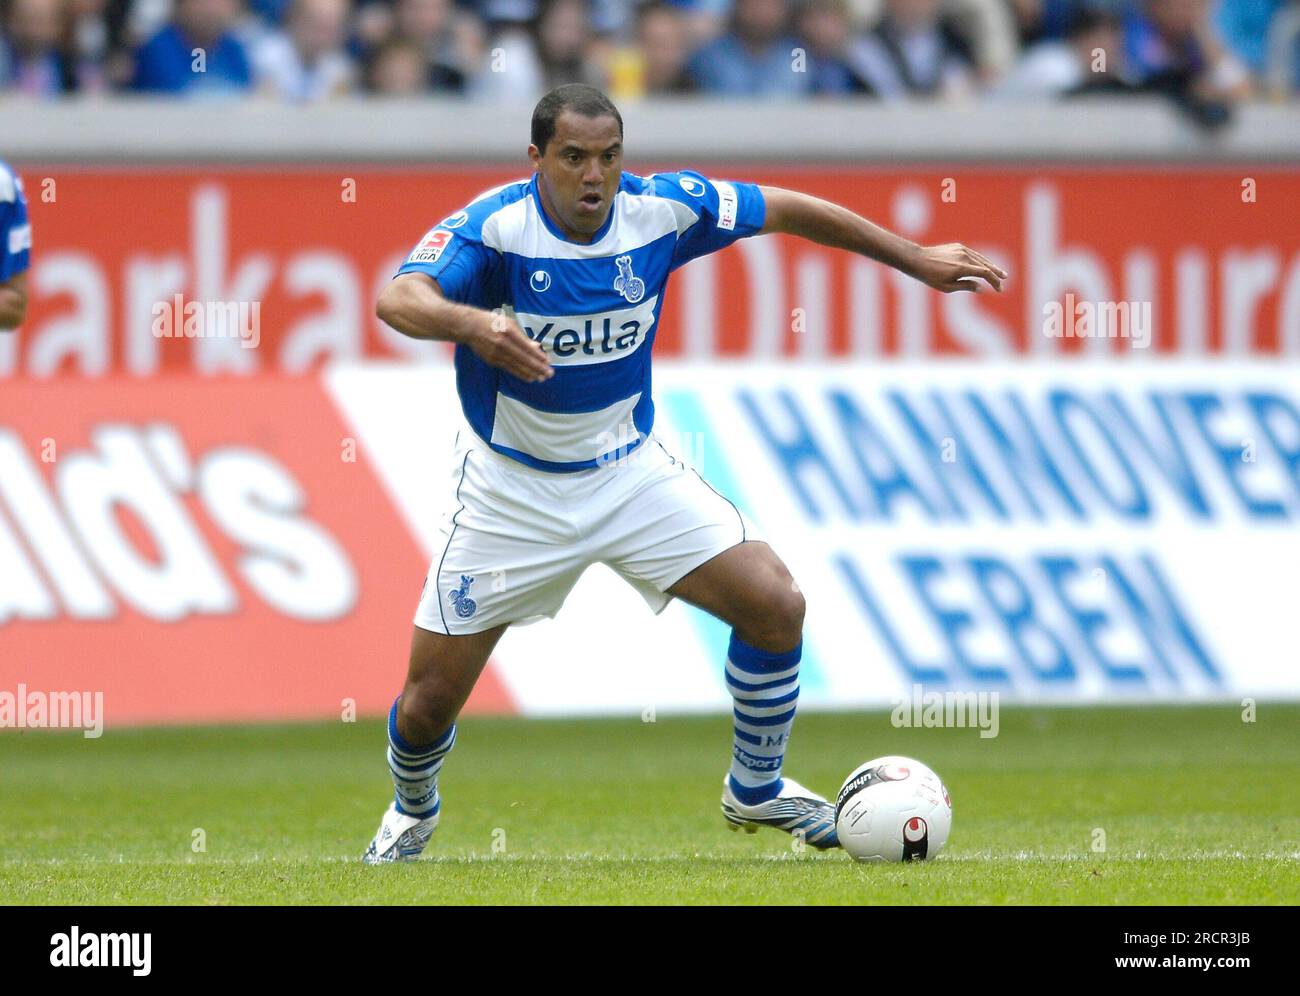 ARCHIVE PHOTO: Soccer player AILTON will be 50 years old on July 19, 2023,  AILTON, BRA, MSV, action, single action soccer friendly match, MSV Duisburg  - PSV Eindhoven (NL) 2:1, on 28.07.2007